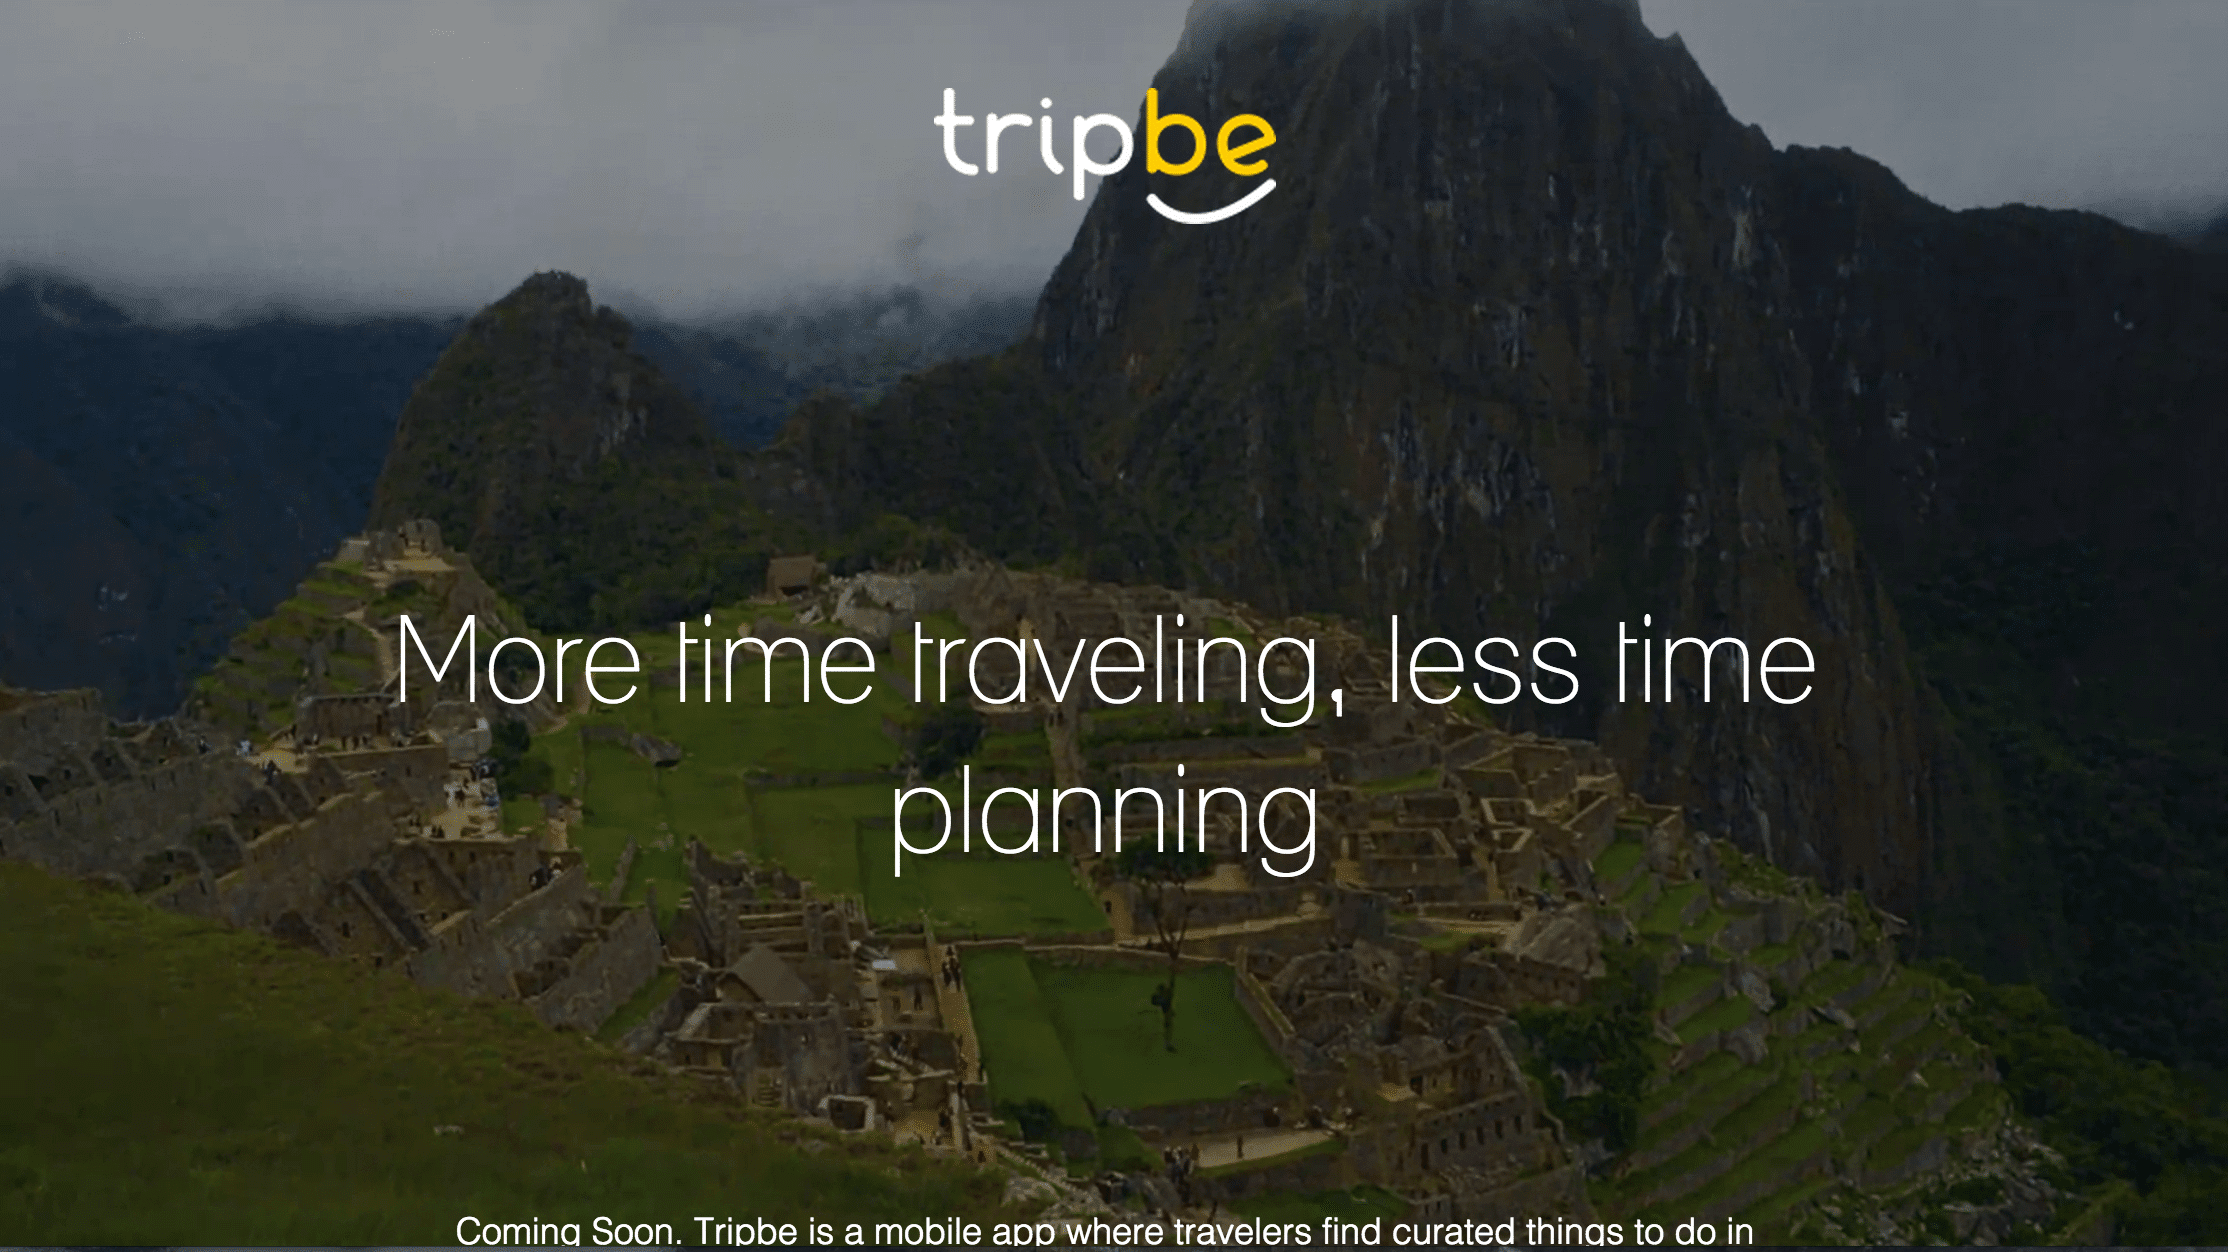 Tripbe is a mobile app where travelers find curated things to do in a destination. 